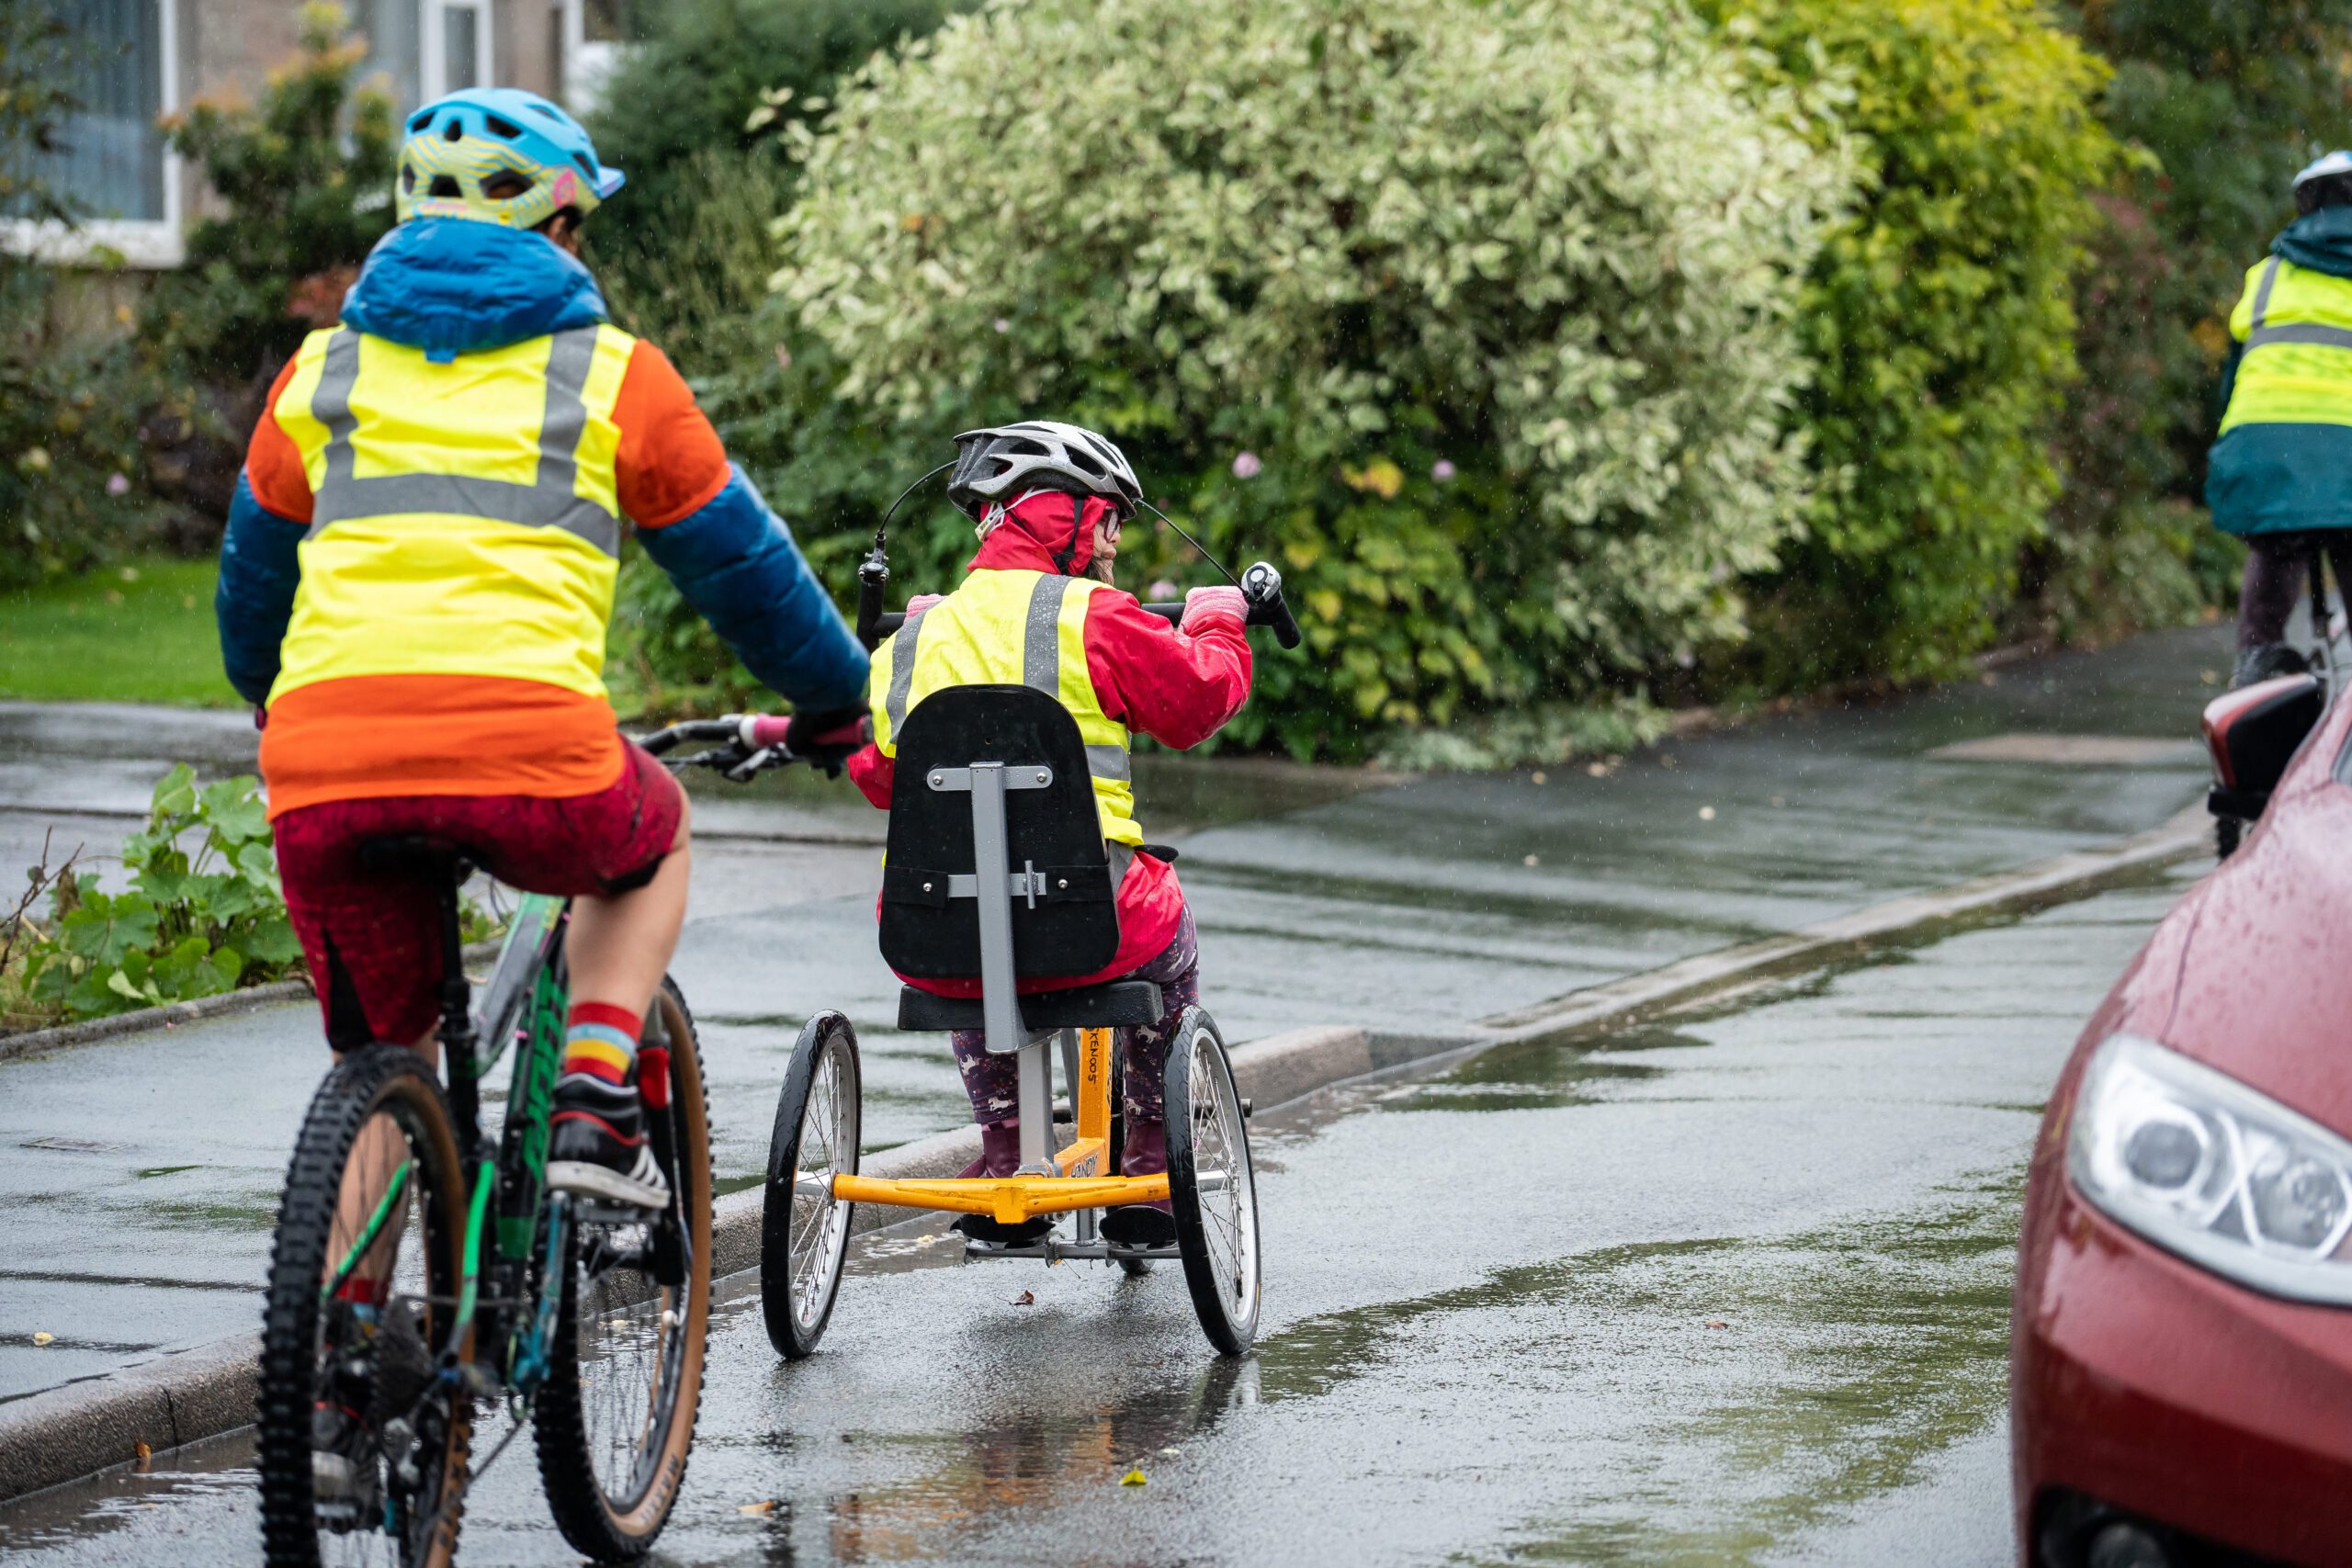 A Bikeability instructor and student cycling on the road. The student is riding a hand tricycle. They are both in hi vis and wearing helmets.